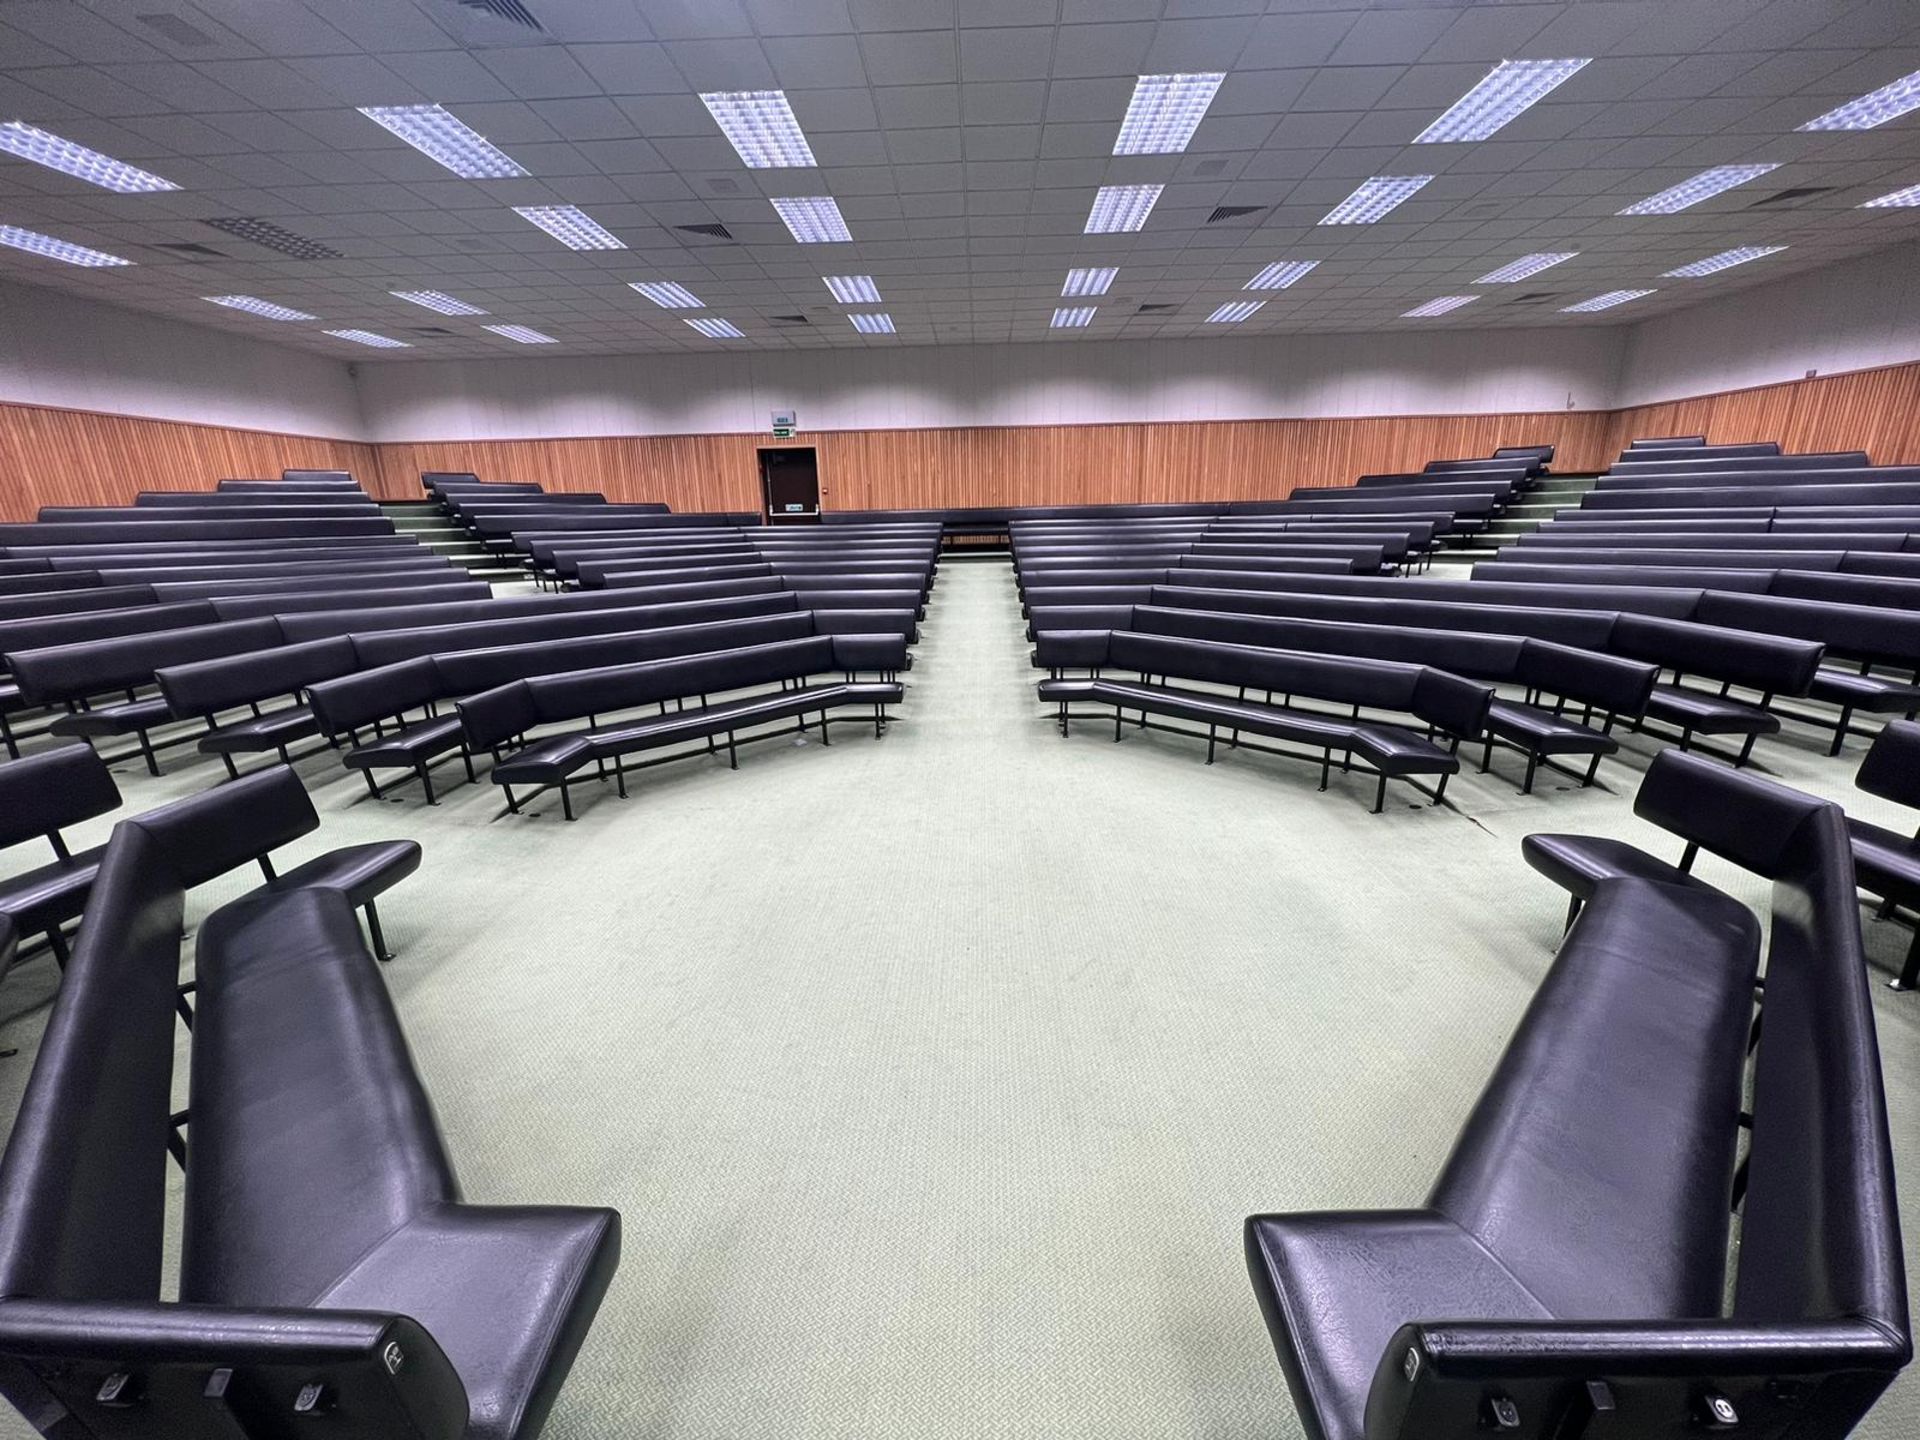 Conference Hall Seating Arrangement - Image 3 of 7